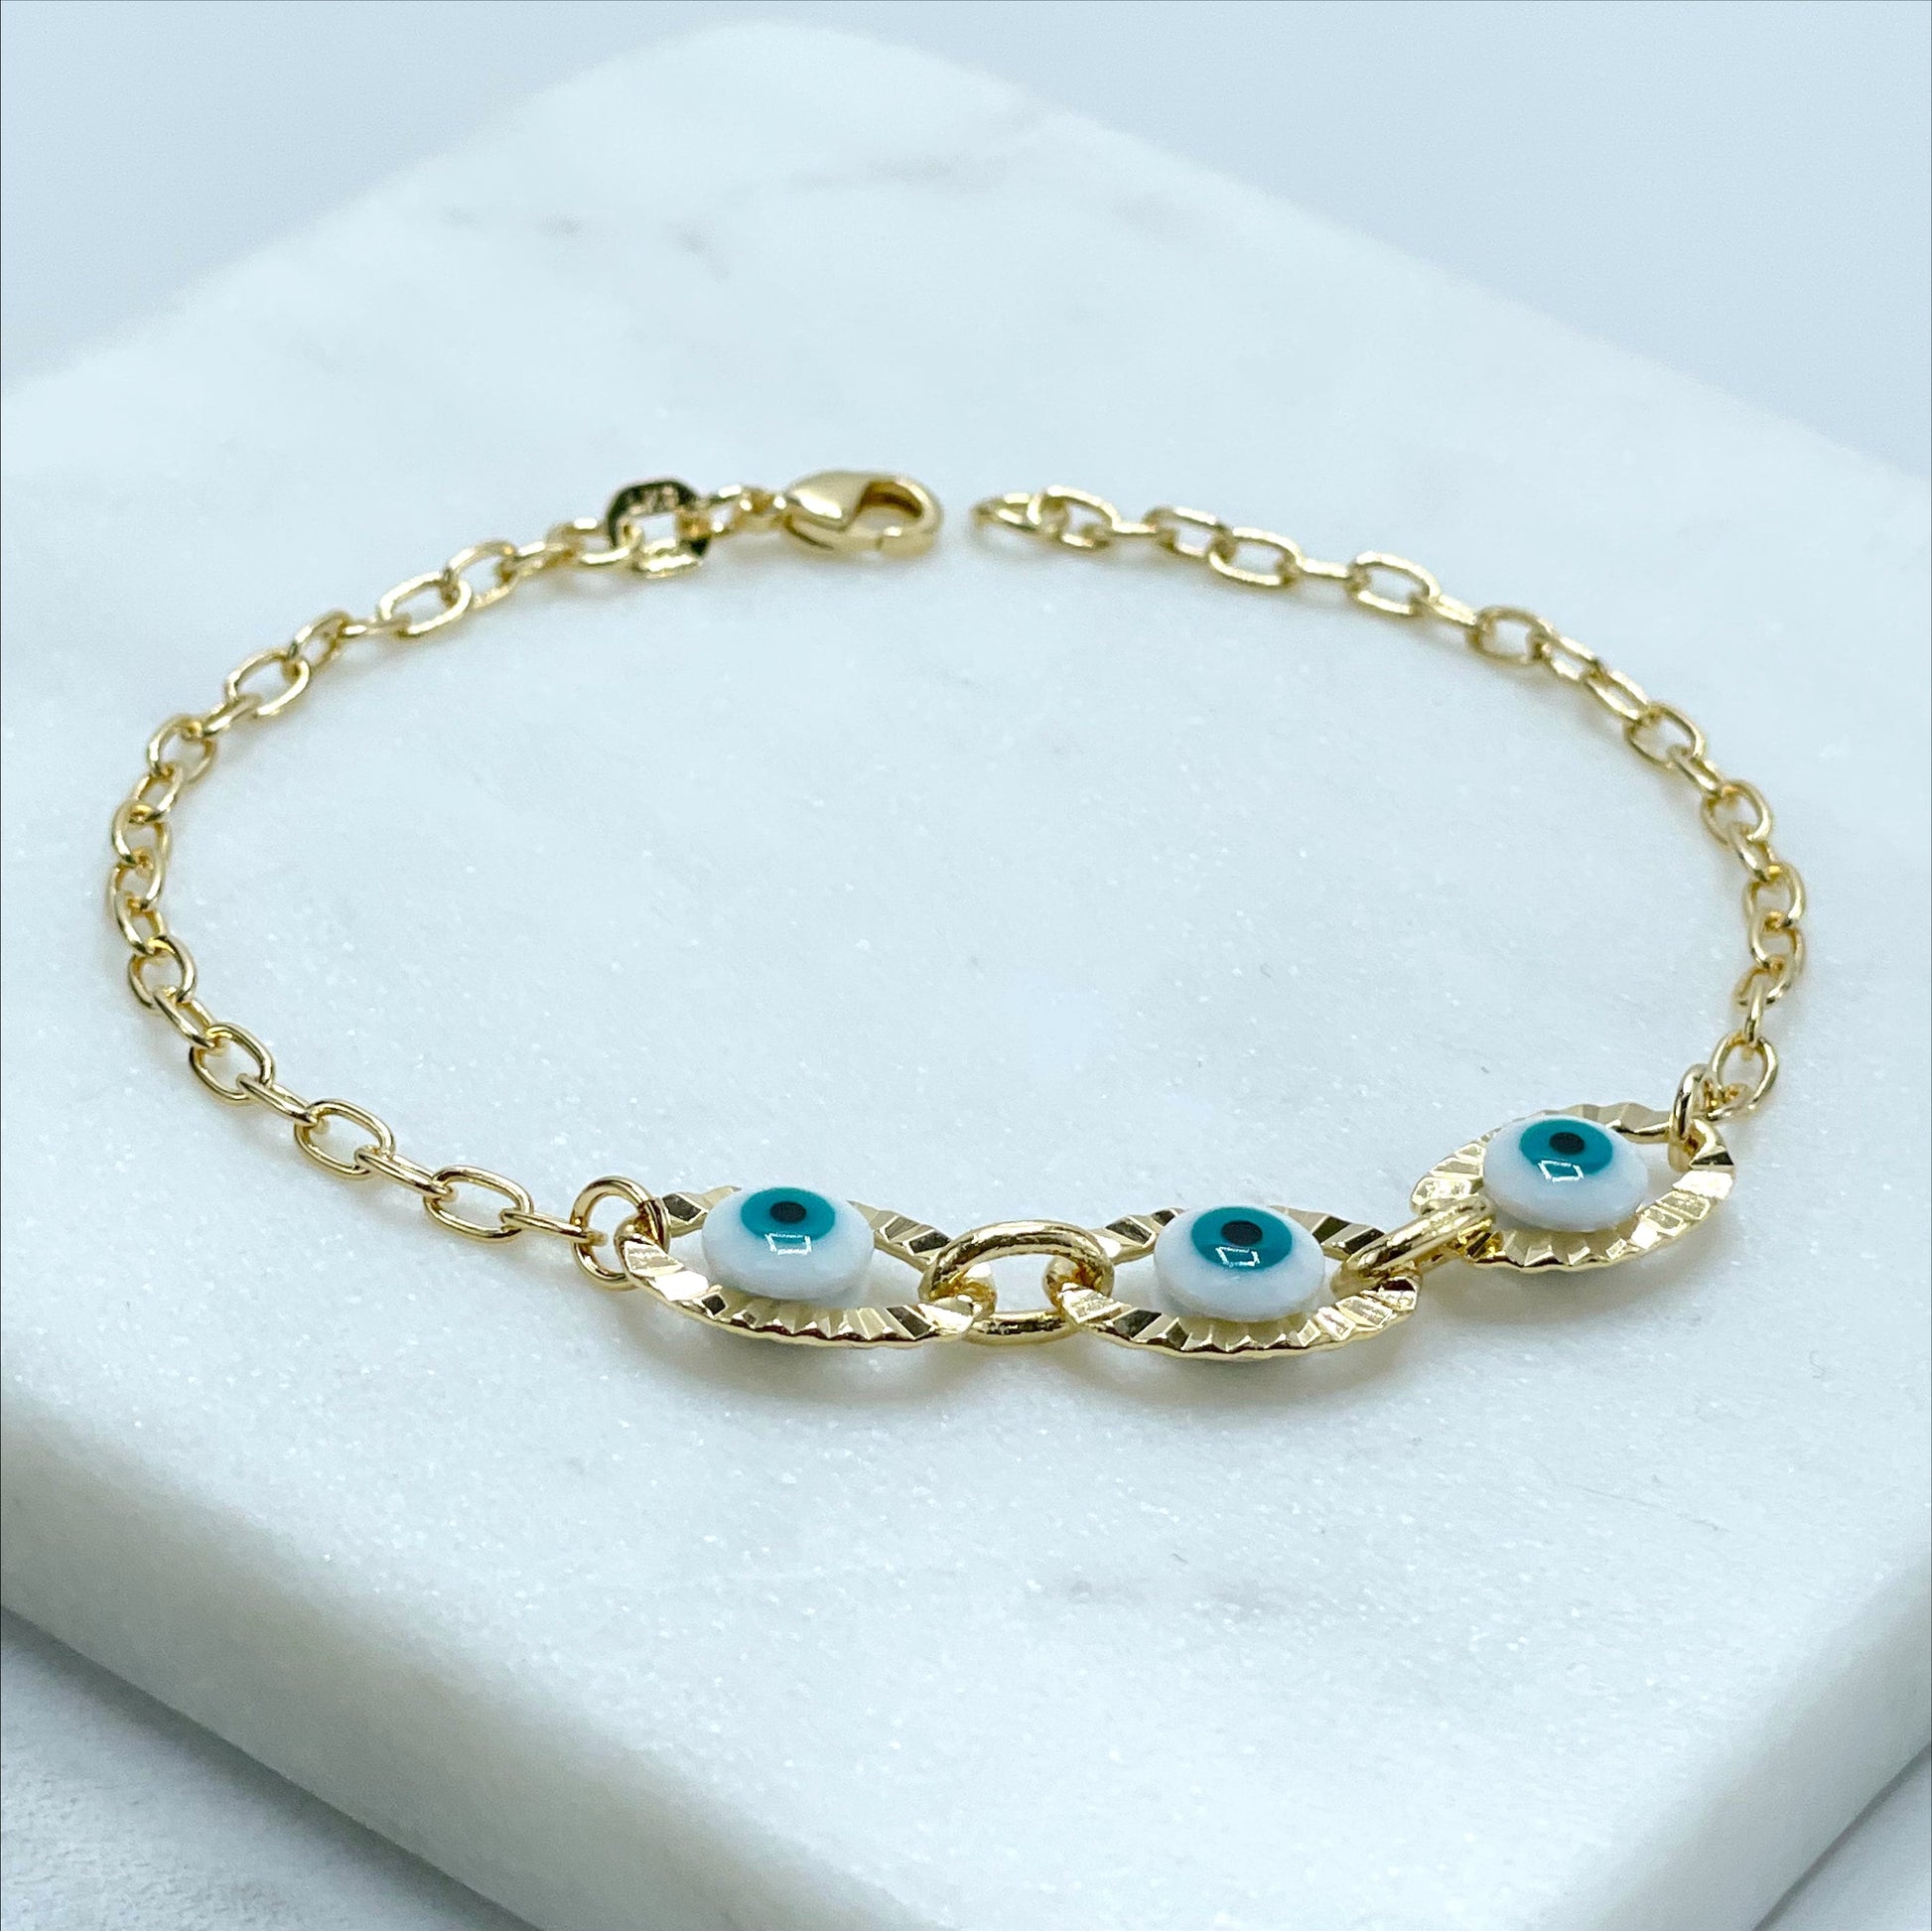 18k Gold Filled 2mm Cable Link Chain, Bracelet with Three Enamel Evil Eye Charms, Protection & Lucky, Wholesale Jewelry Making Supplies